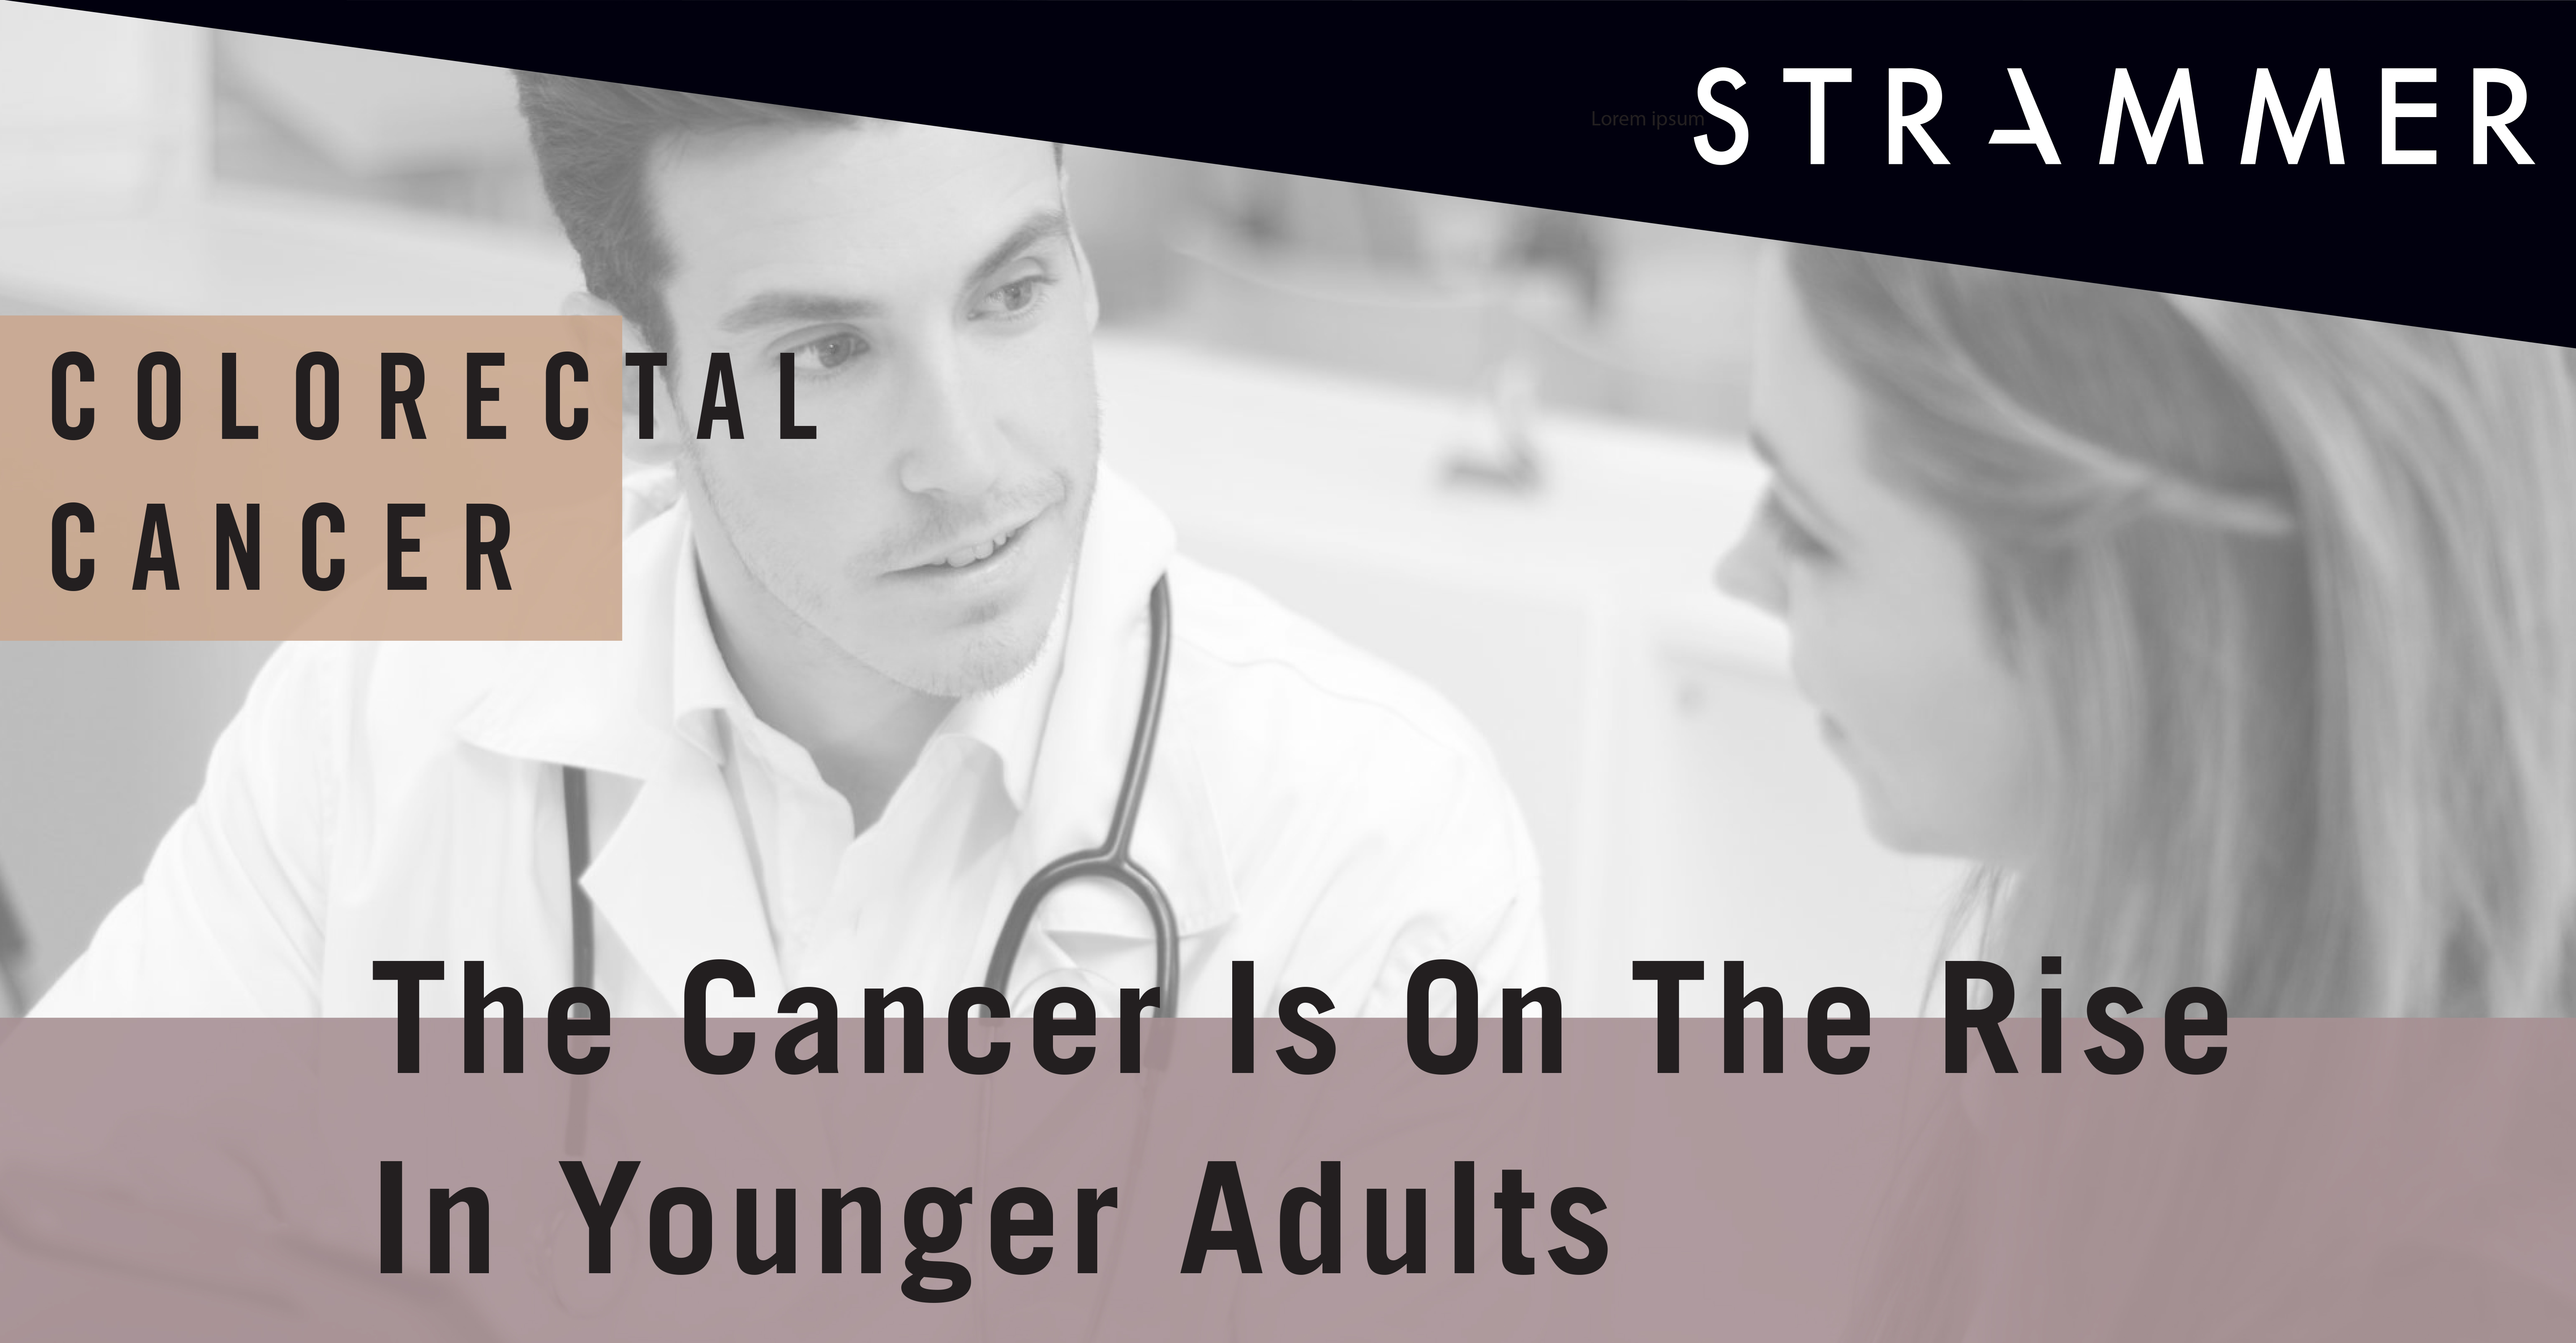 Colorectal Cancer affecting more Younger Adults